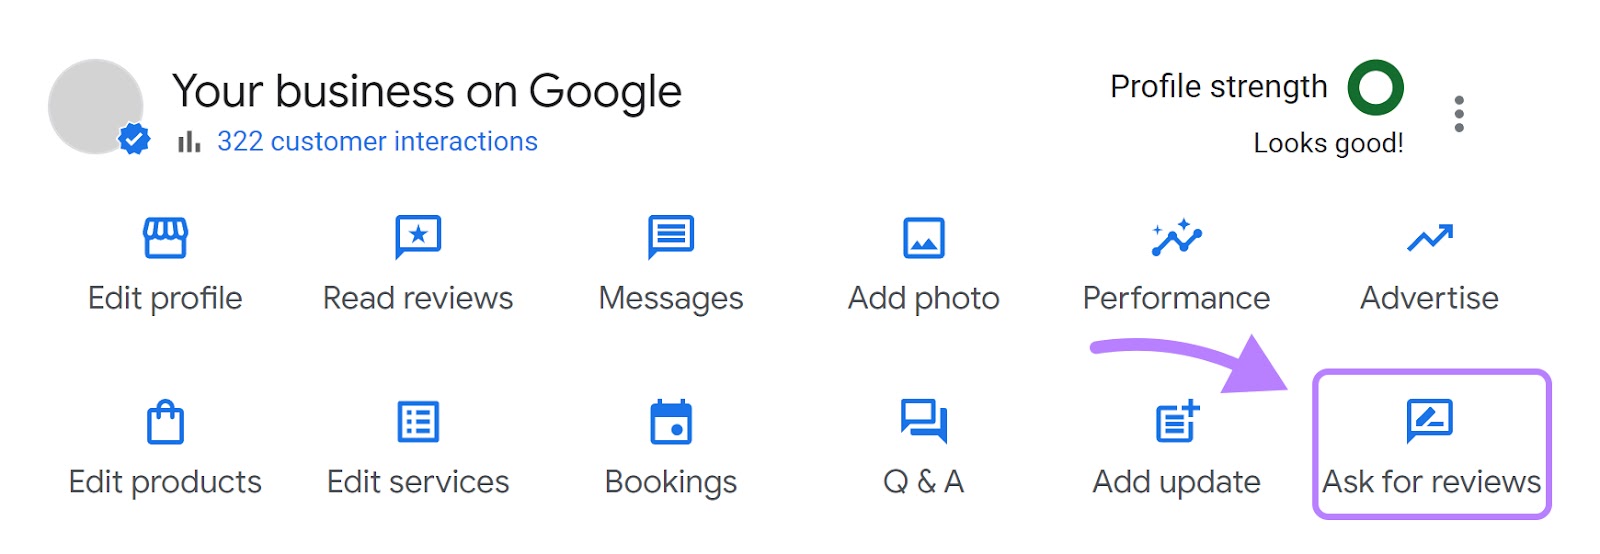 “Ask for reviews” button selected on Google My Business dashboard